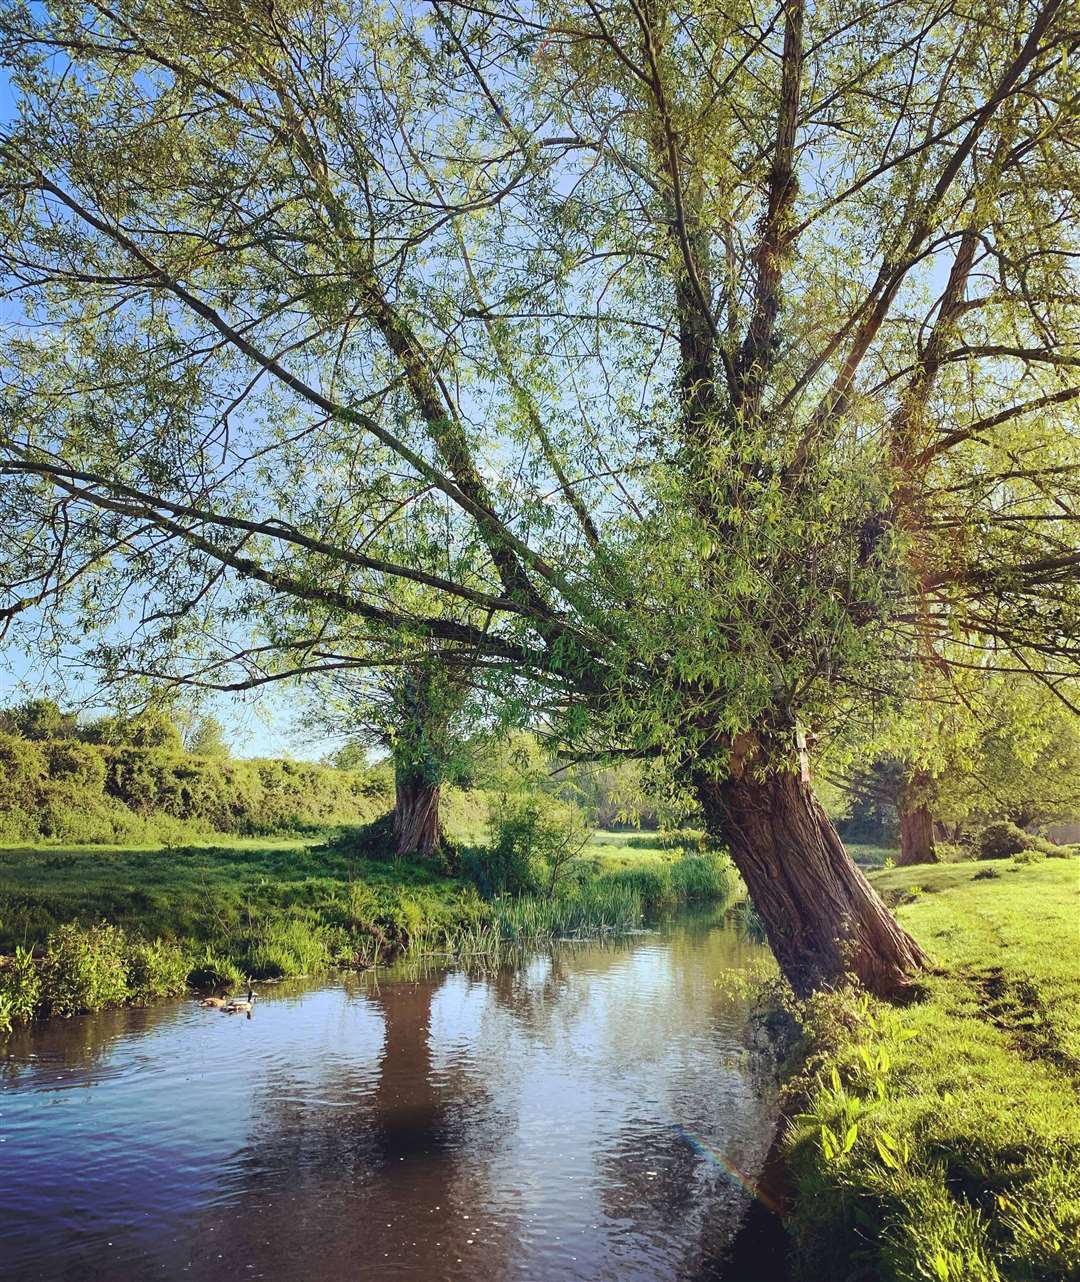 River Darenth in the Spring. Photo credit: ThomasAlexander